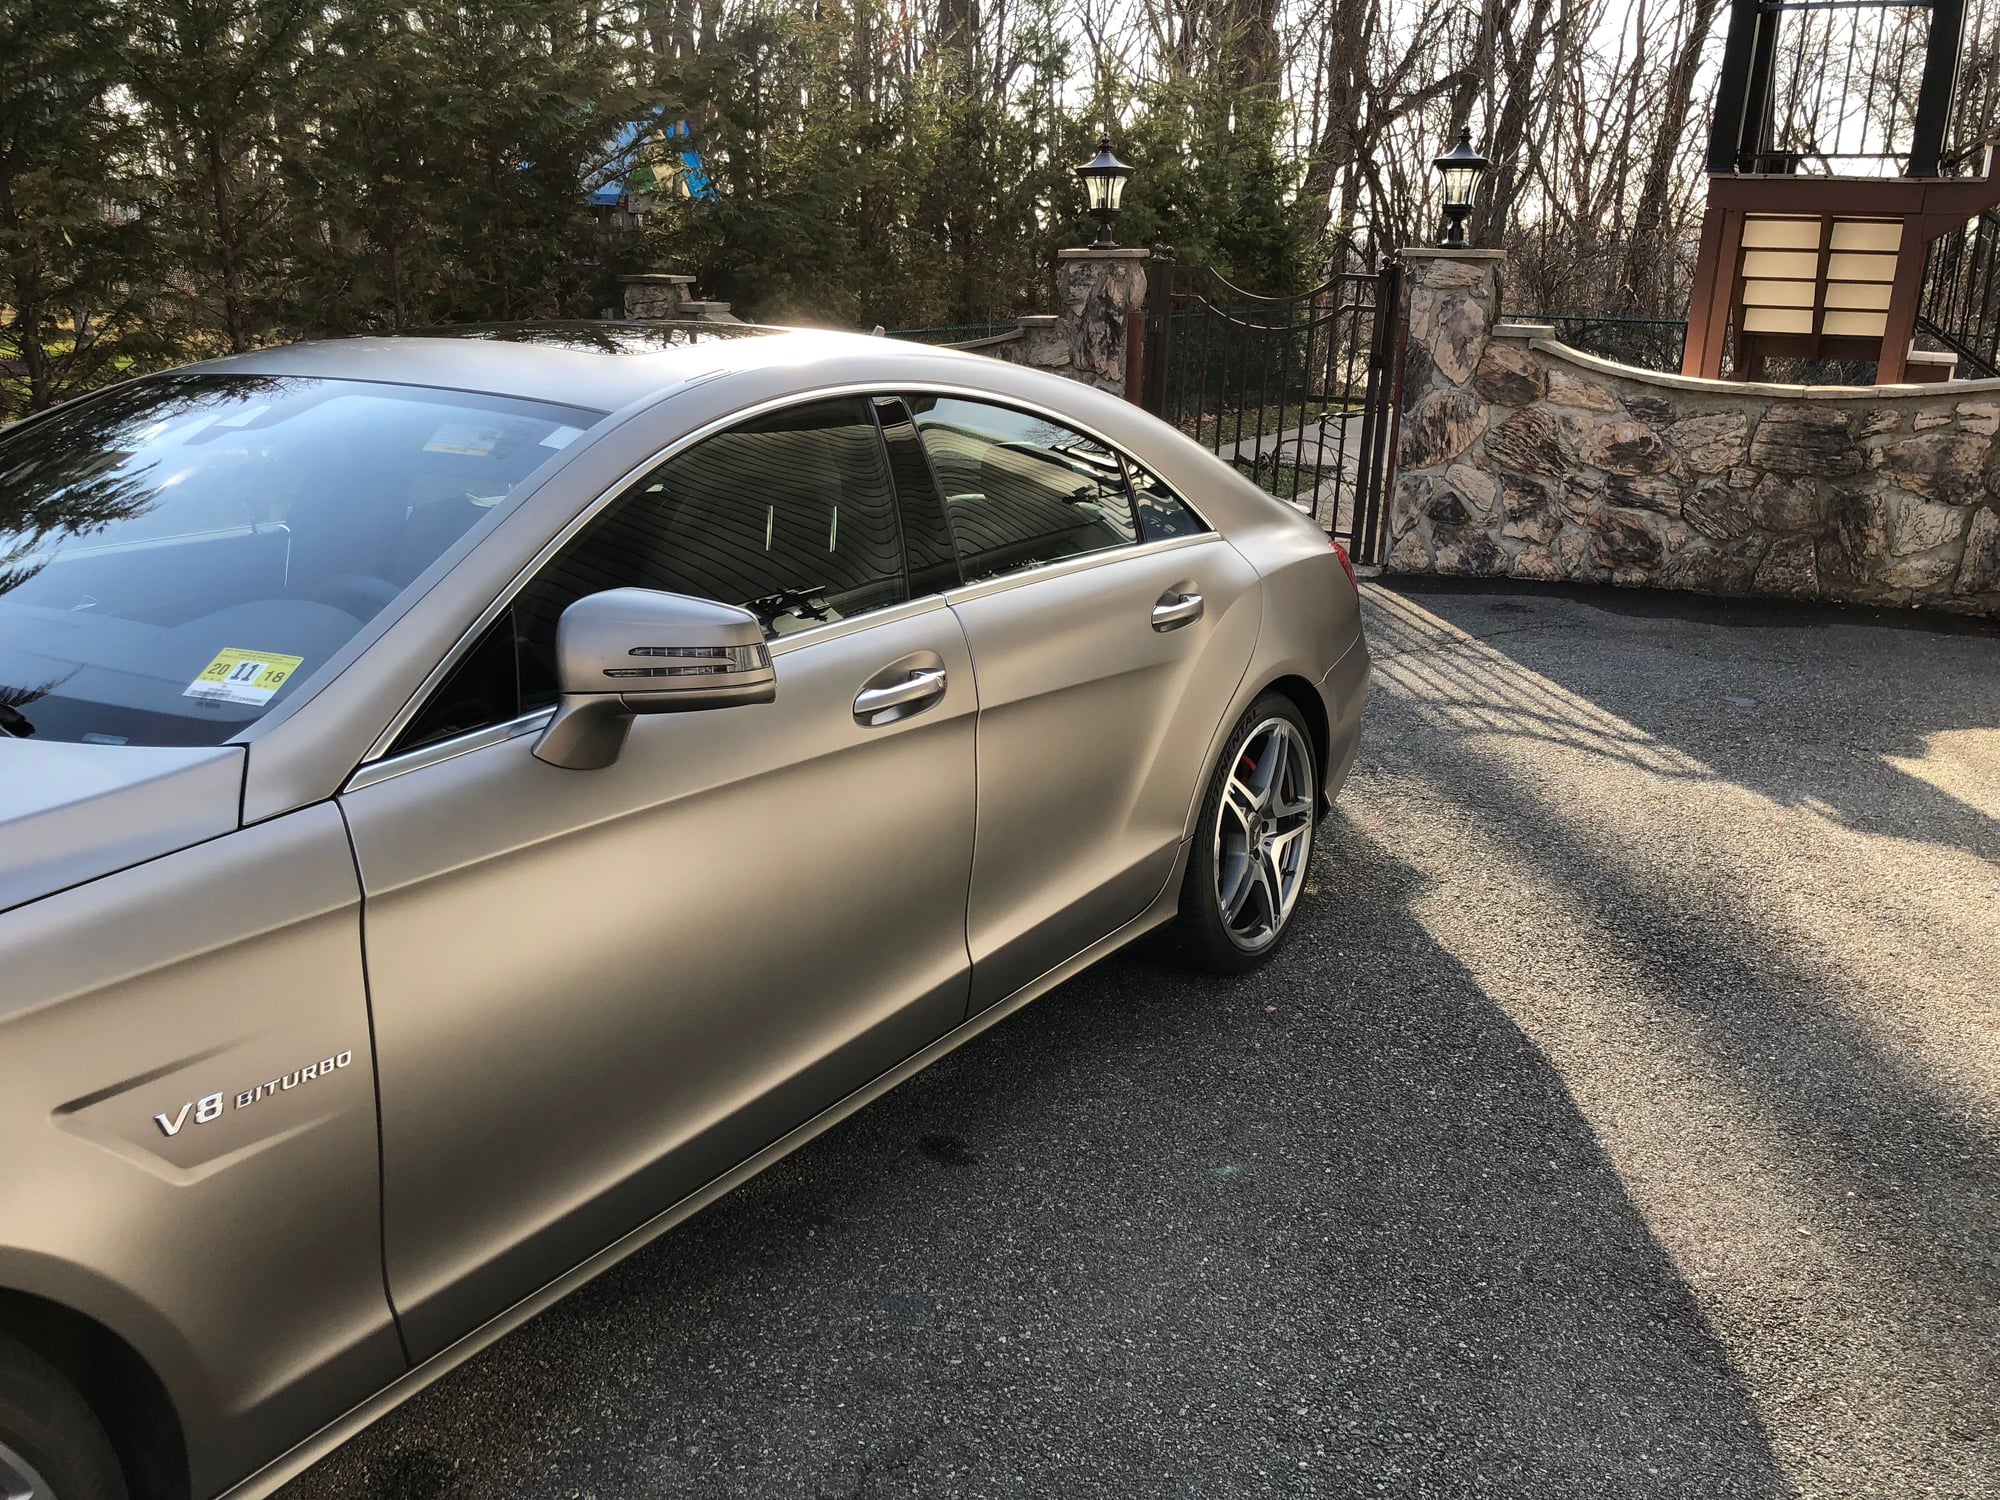 2012 Mercedes-Benz CLS63 AMG - 2012 CLS63 Launch Edition for sale - Used - VIN WDDLJ7EB0CA030598 - 42,800 Miles - 8 cyl - 2WD - Automatic - Coupe - Other - Woodland Park, NJ 07424, United States